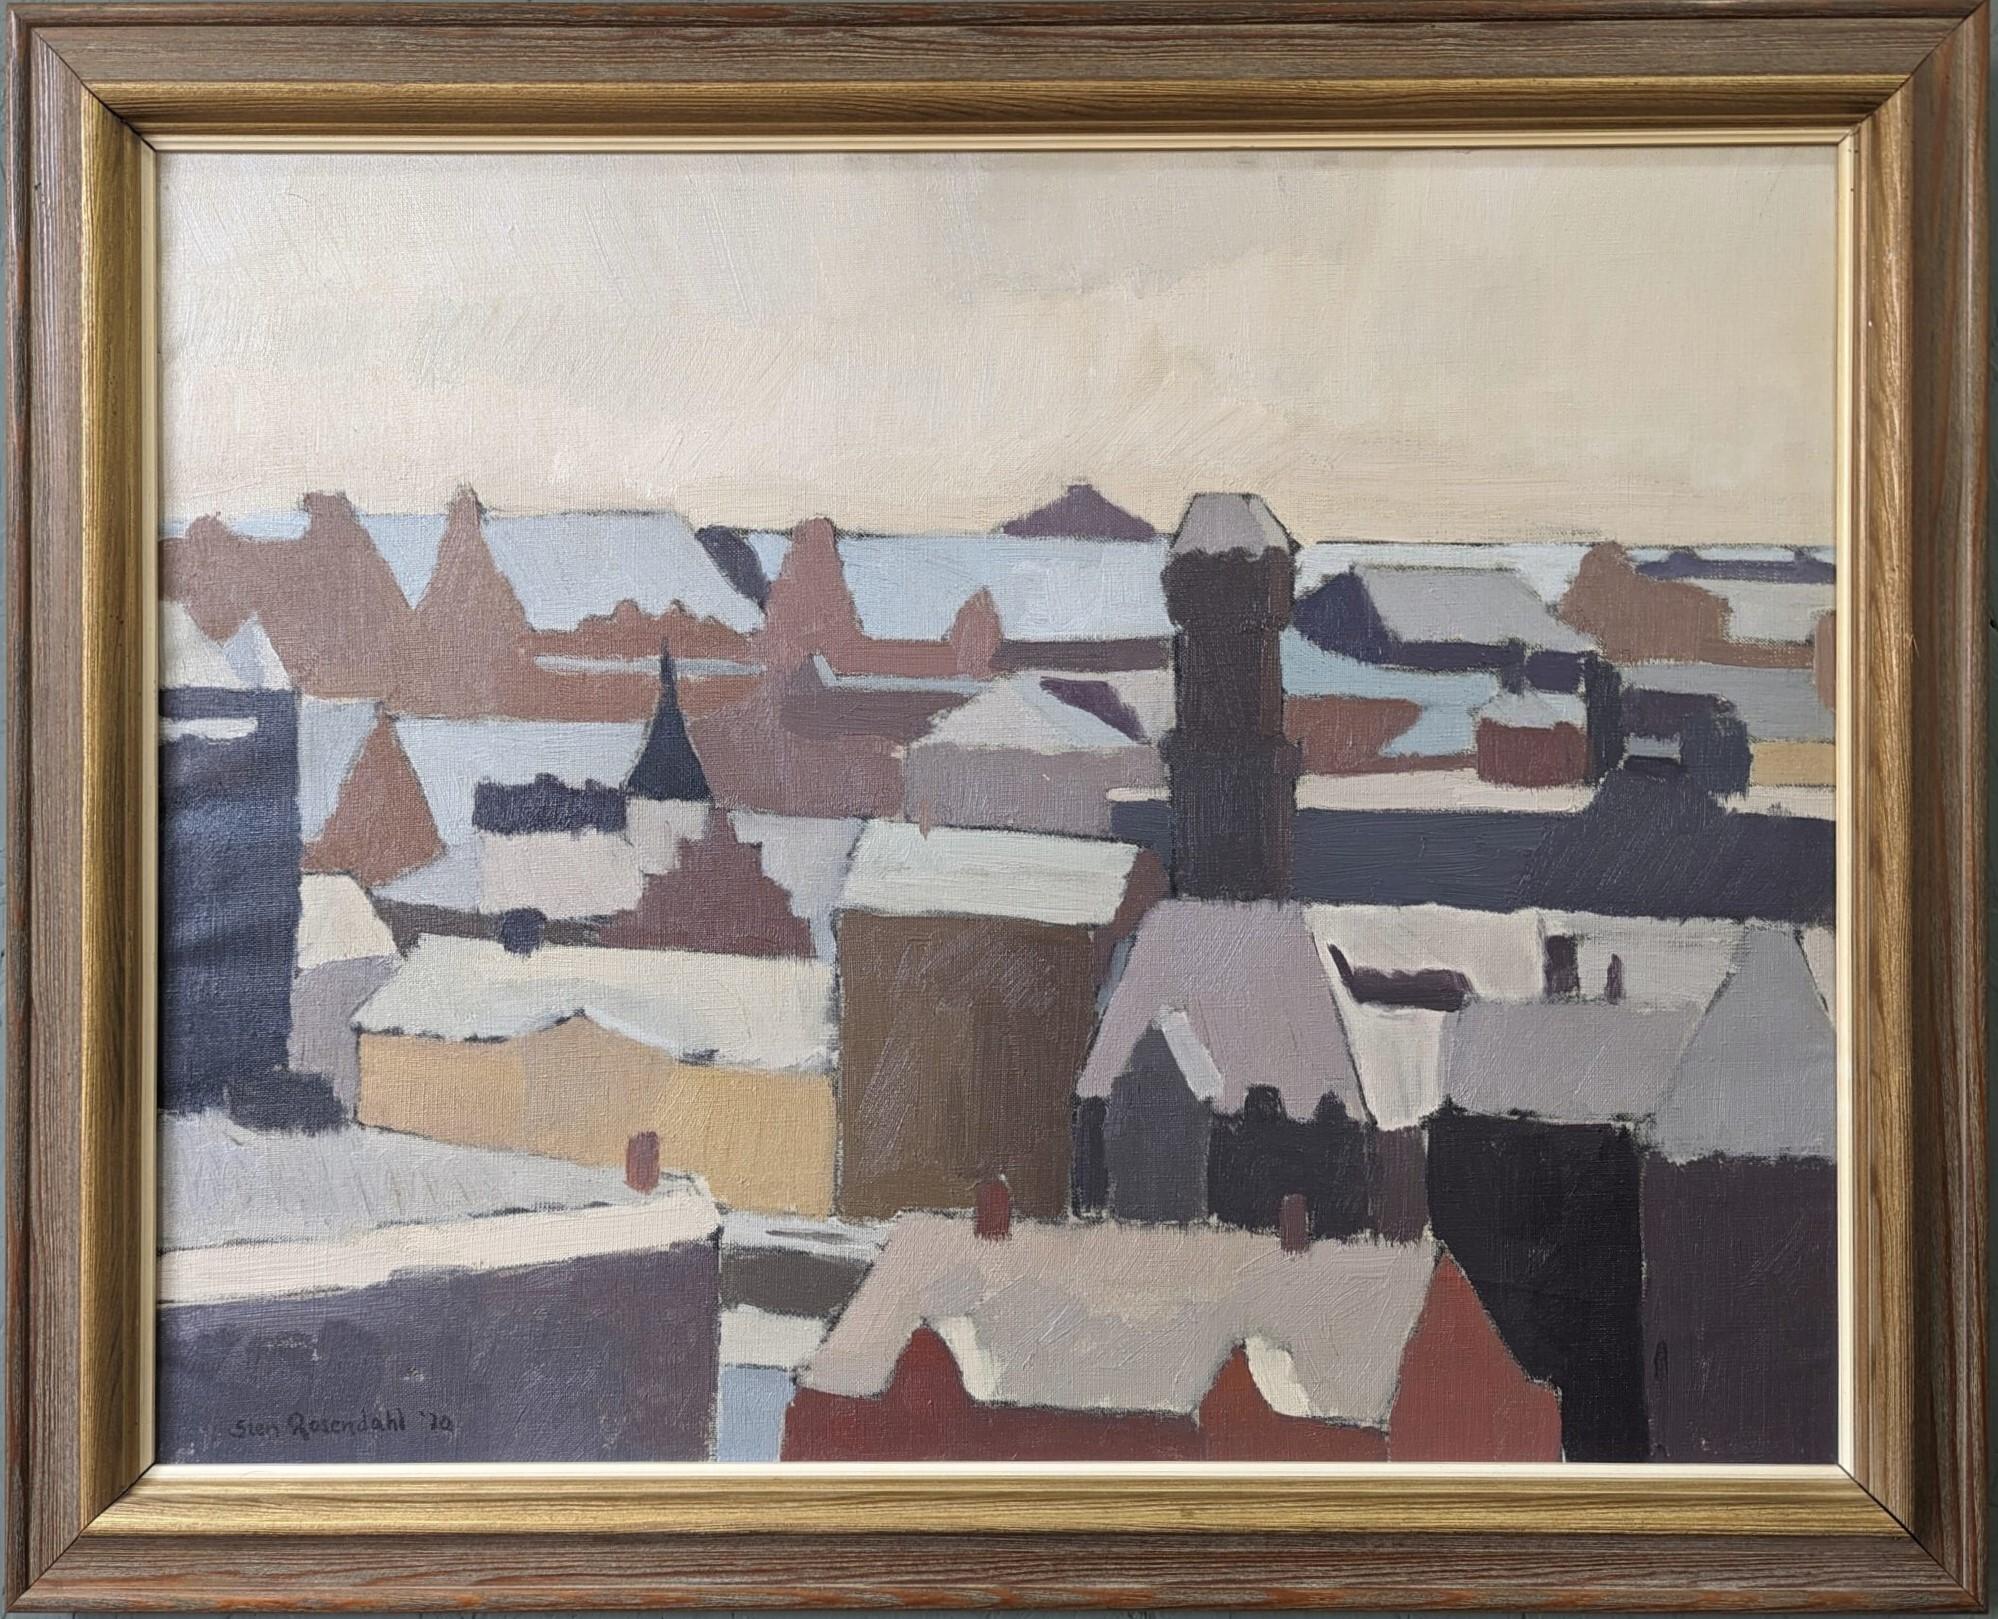 1970 Vintage Original Swedish Cityscape Framed Oil Painting - Rooftop View